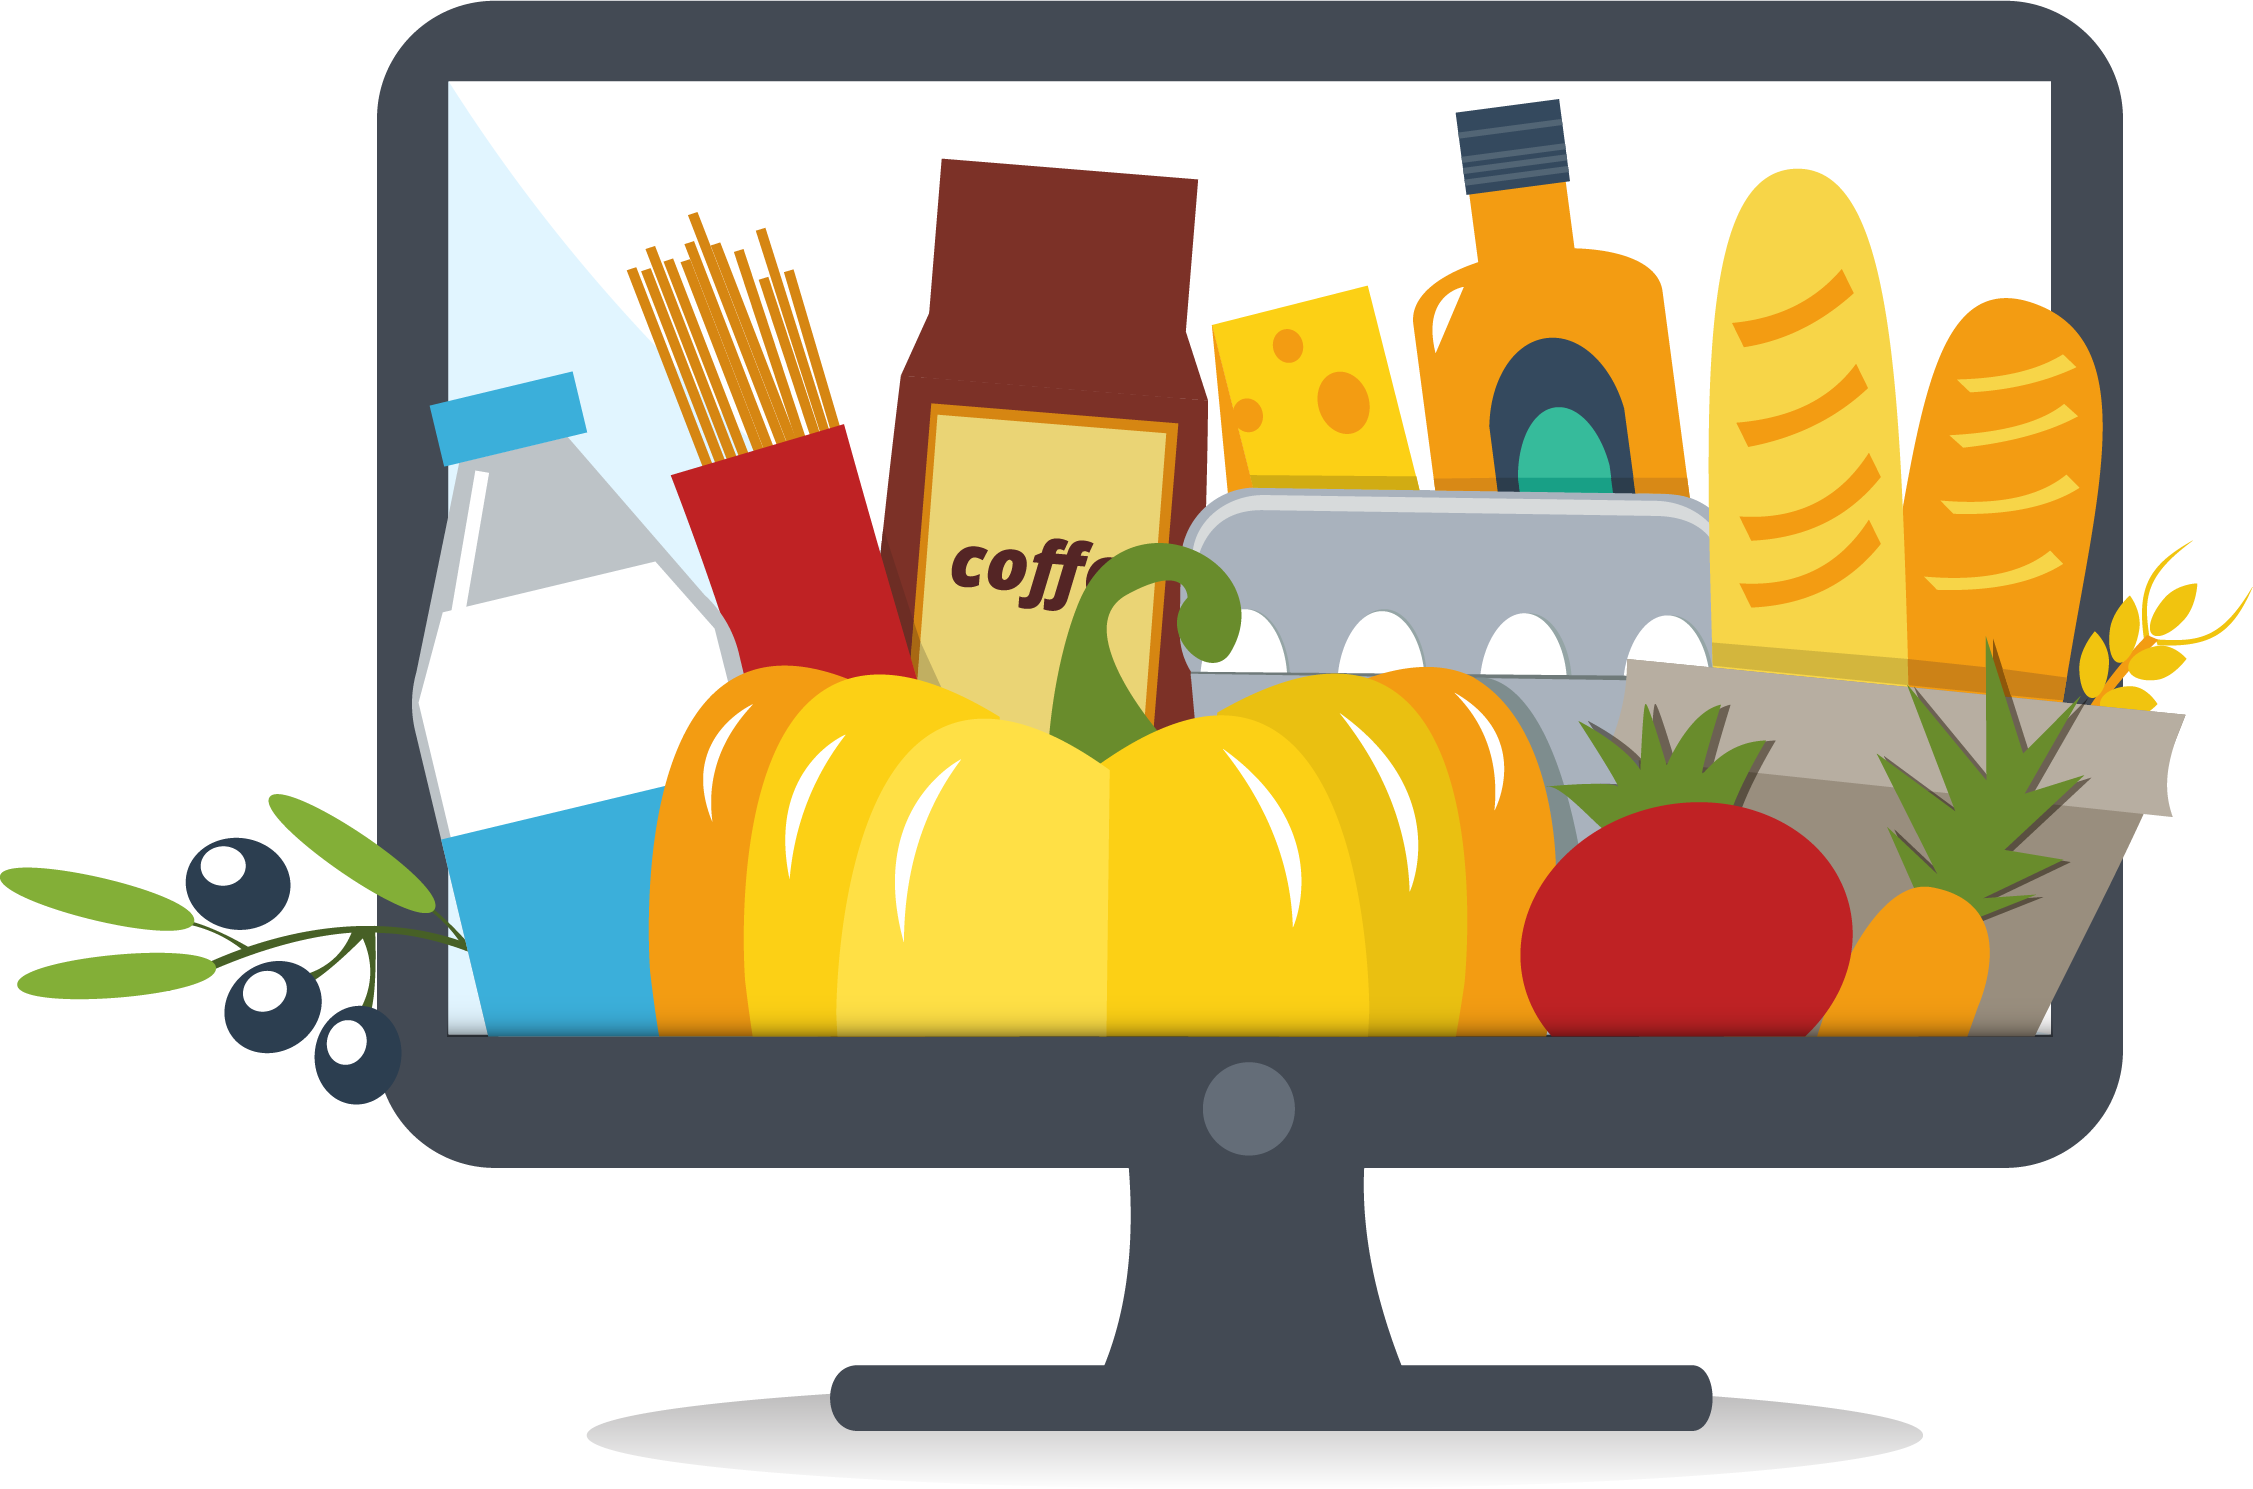 grocery clipart food pantry